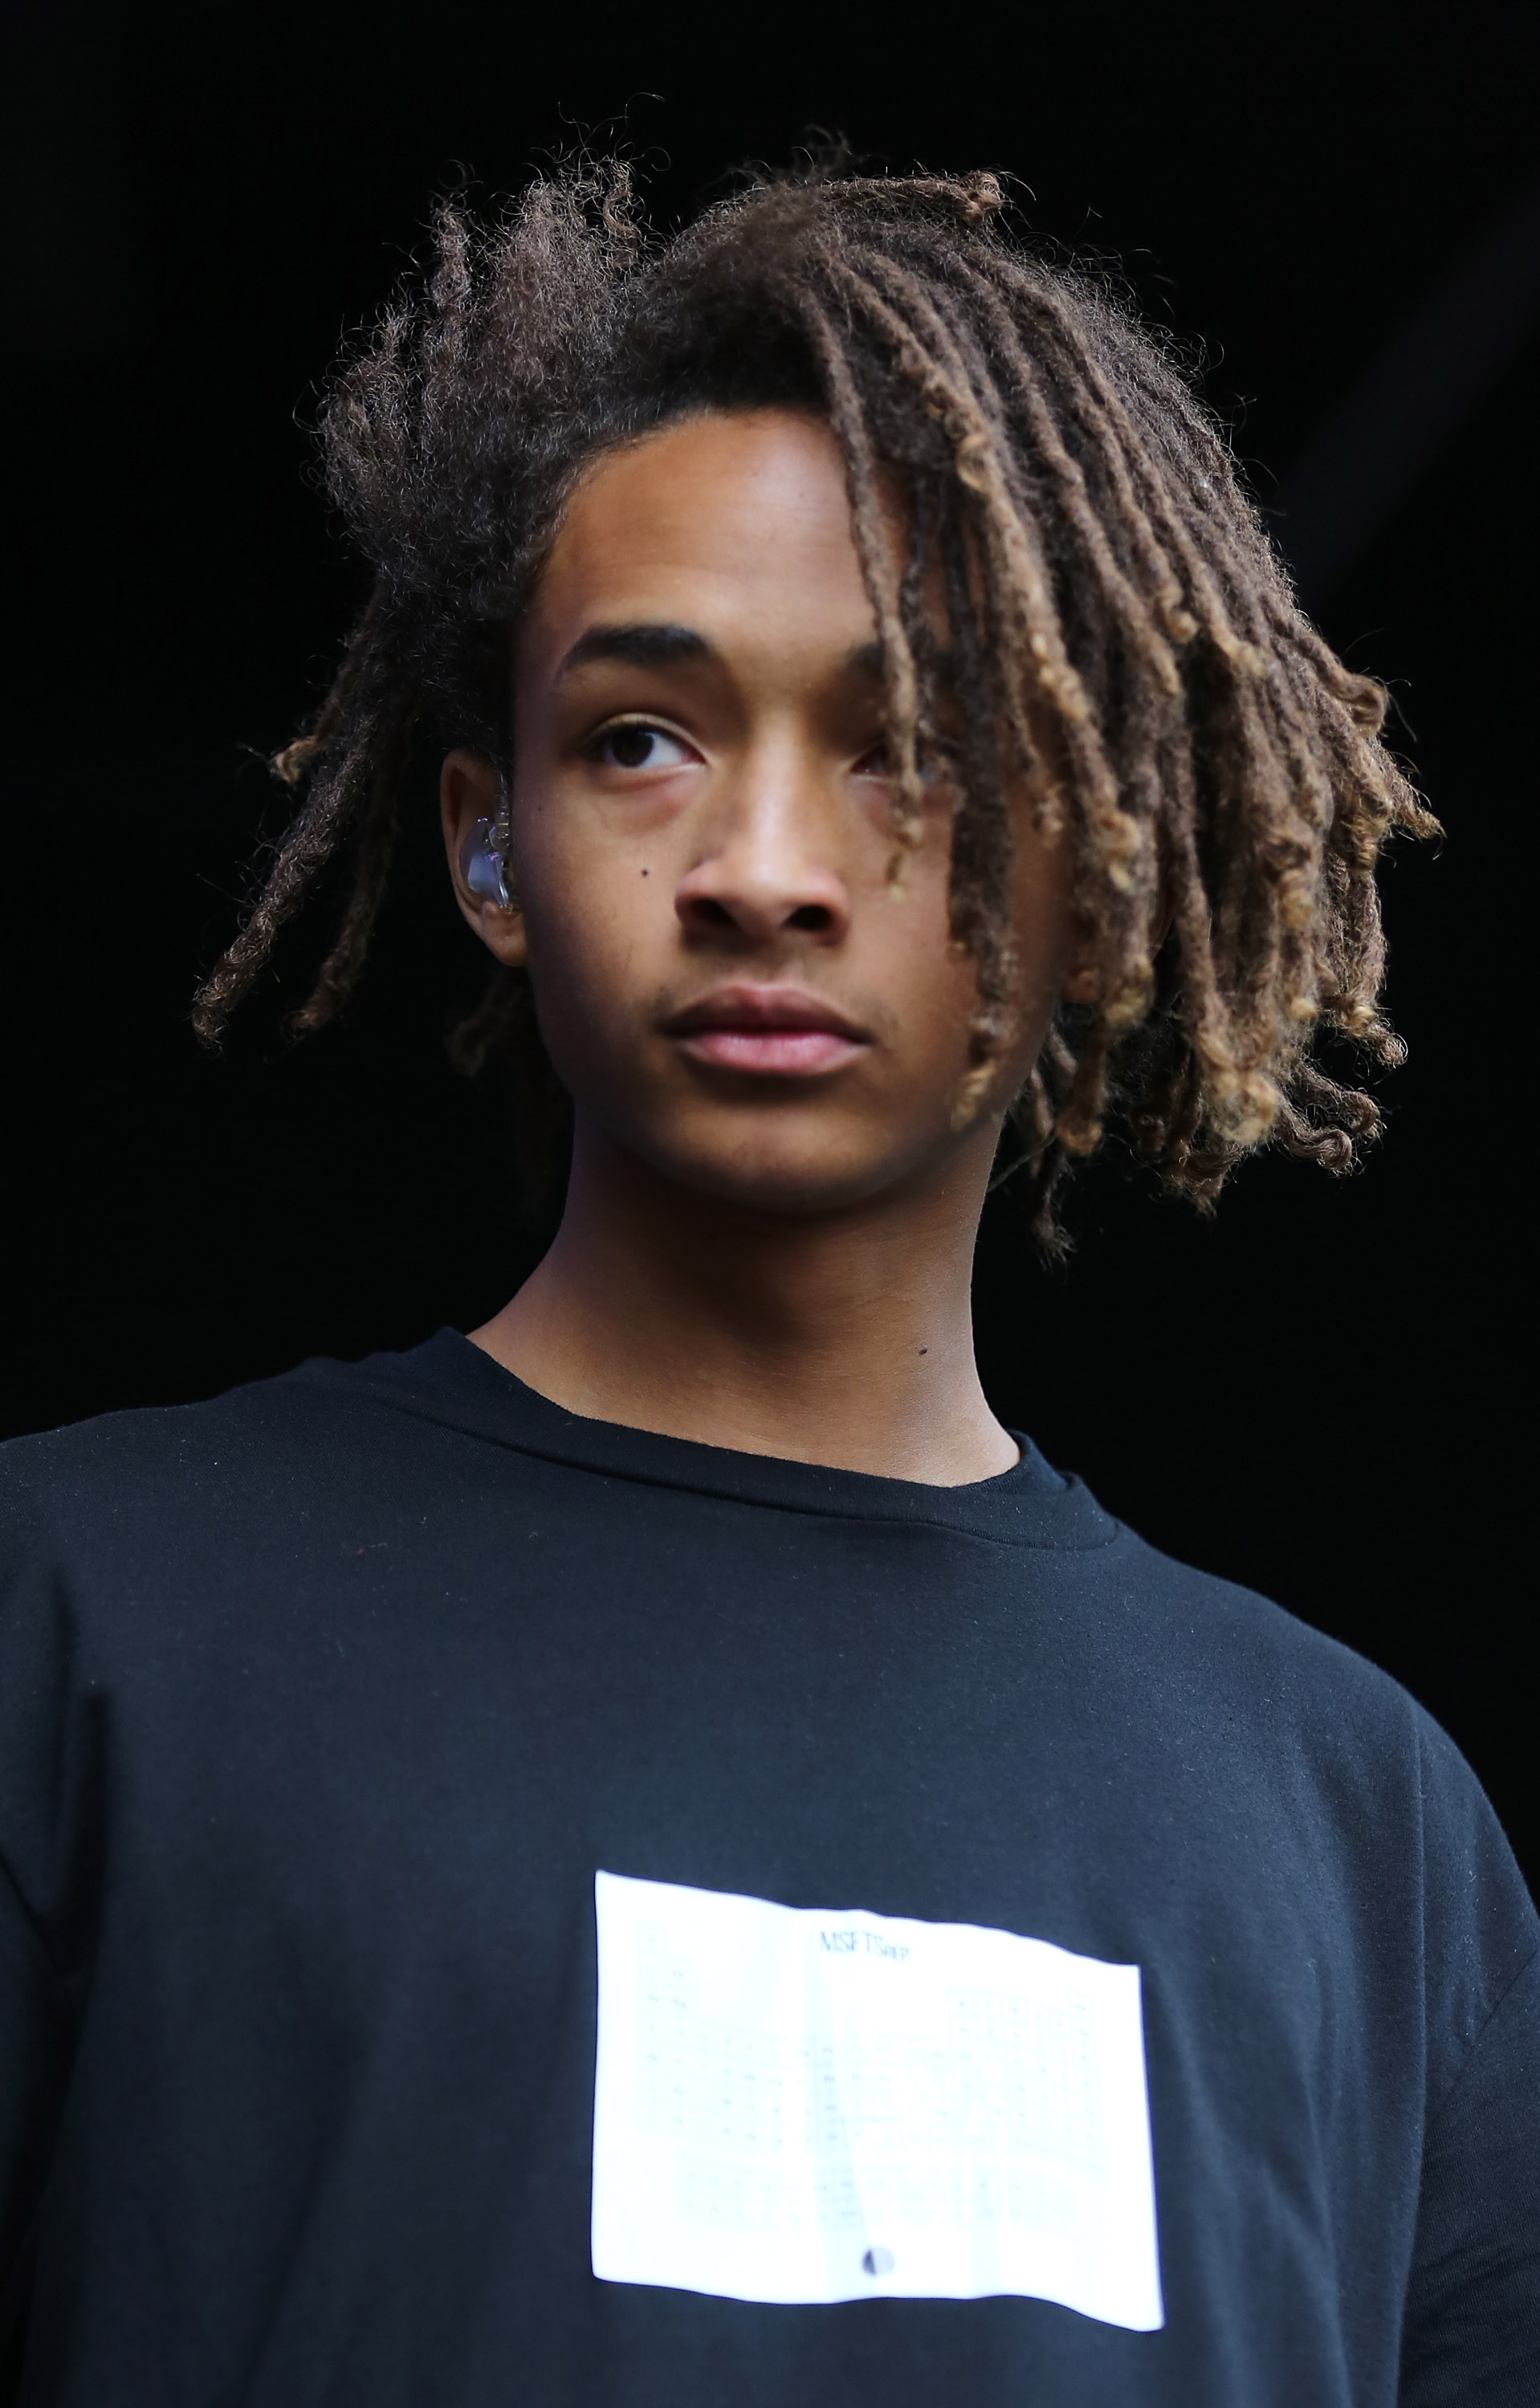 11 Style Lessons Jaden Smith Can Teach You With His Awesome, Rule-Breaking  Outfits — PHOTOS